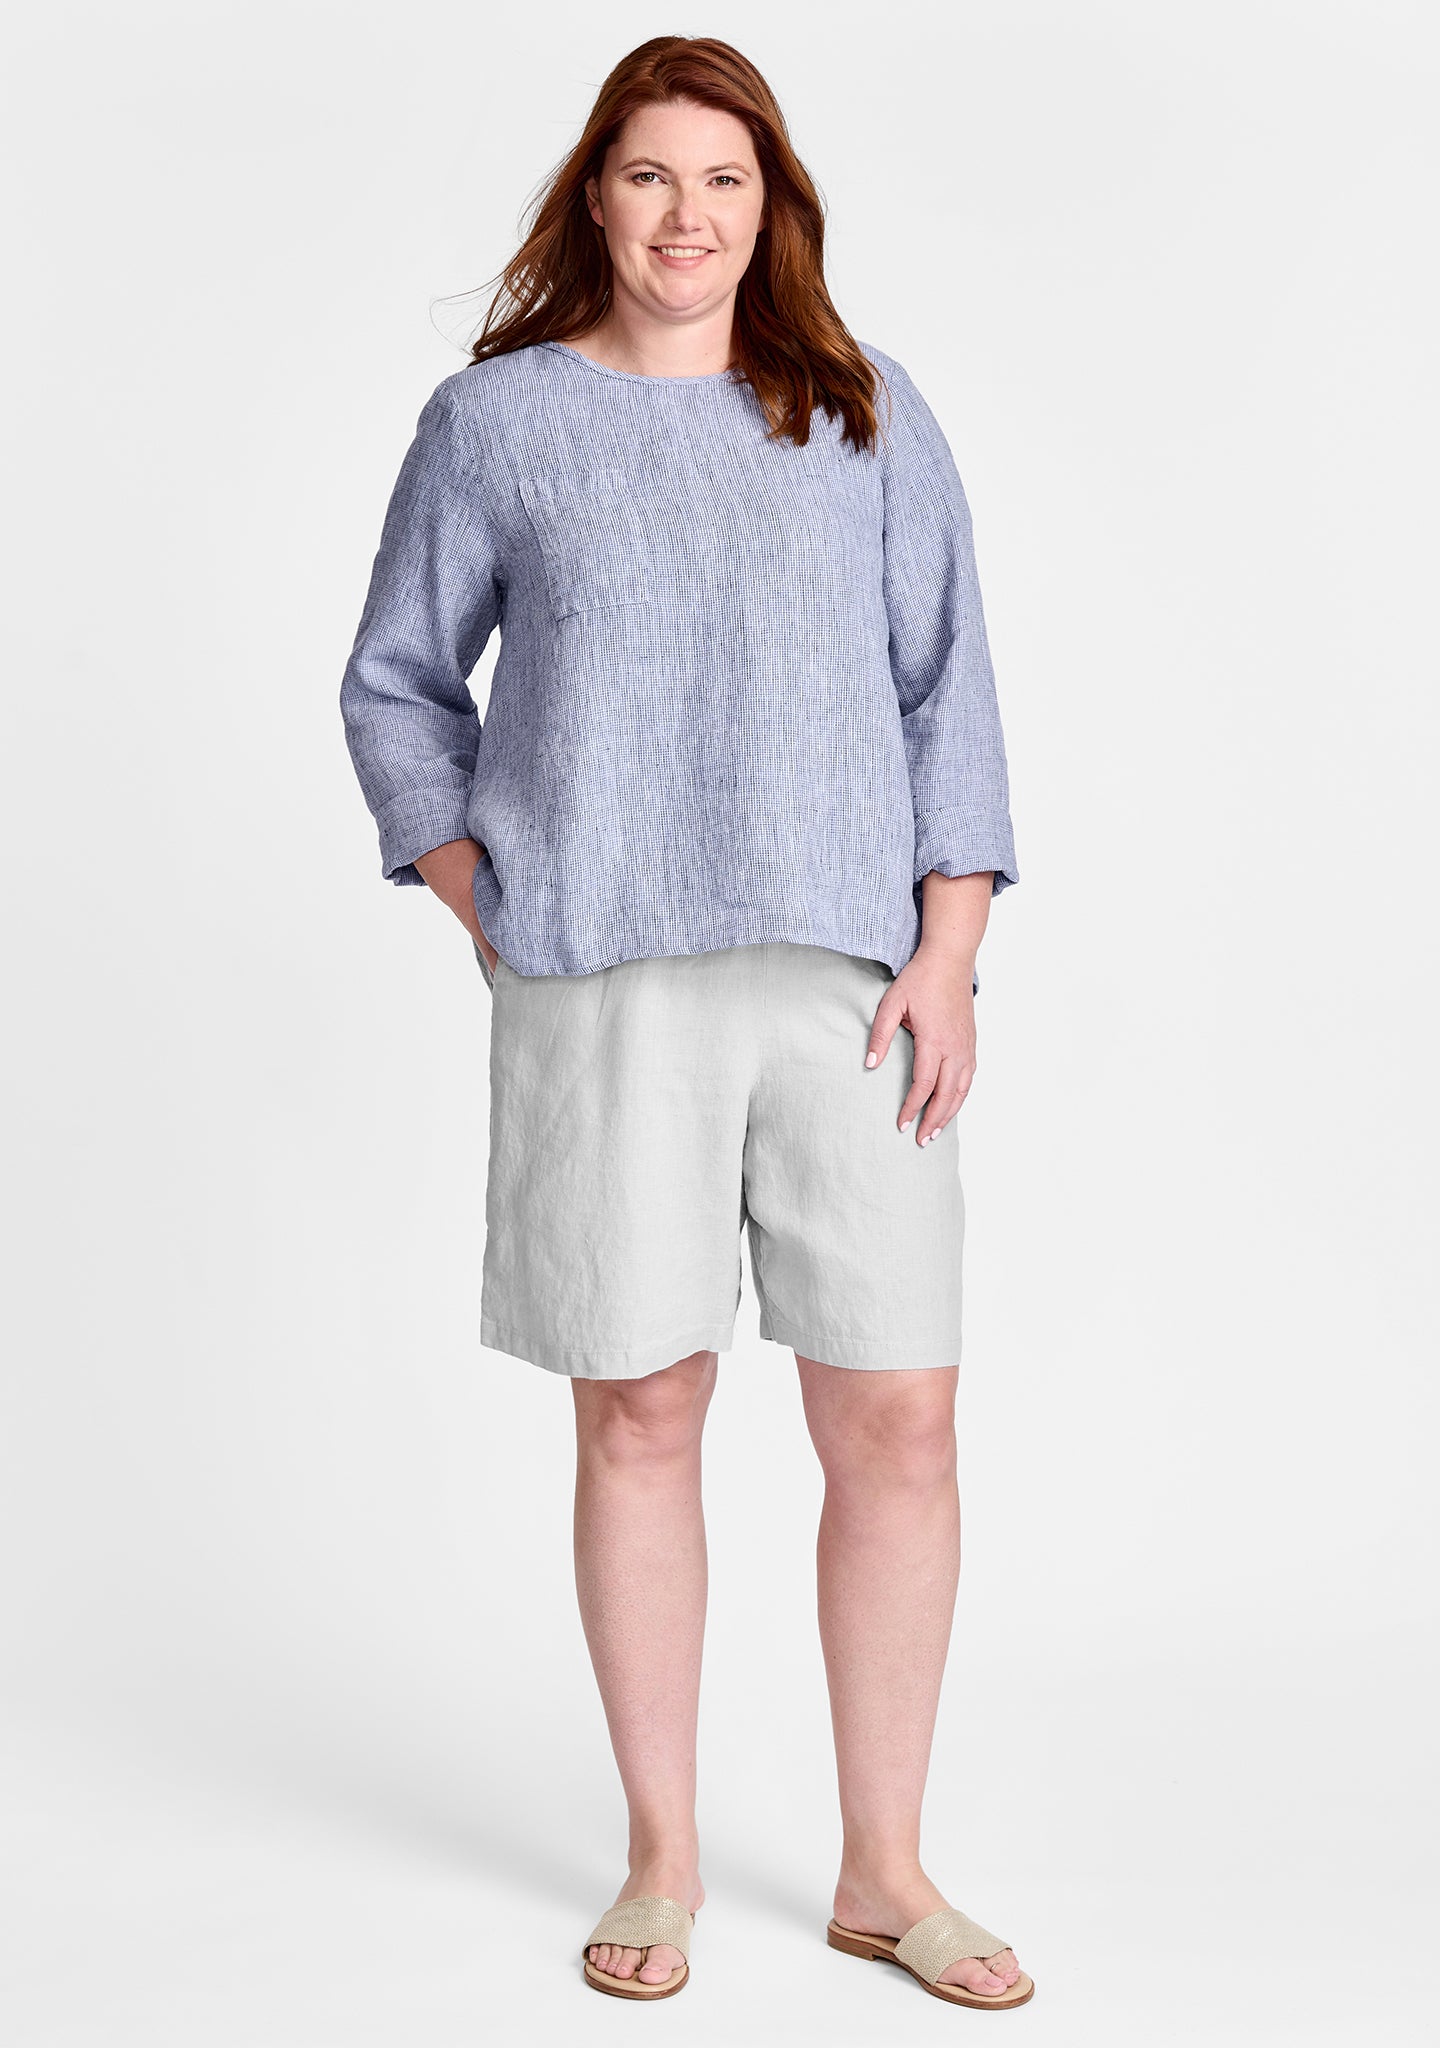 FLAX linen shirt in blue with linen shorts in grey